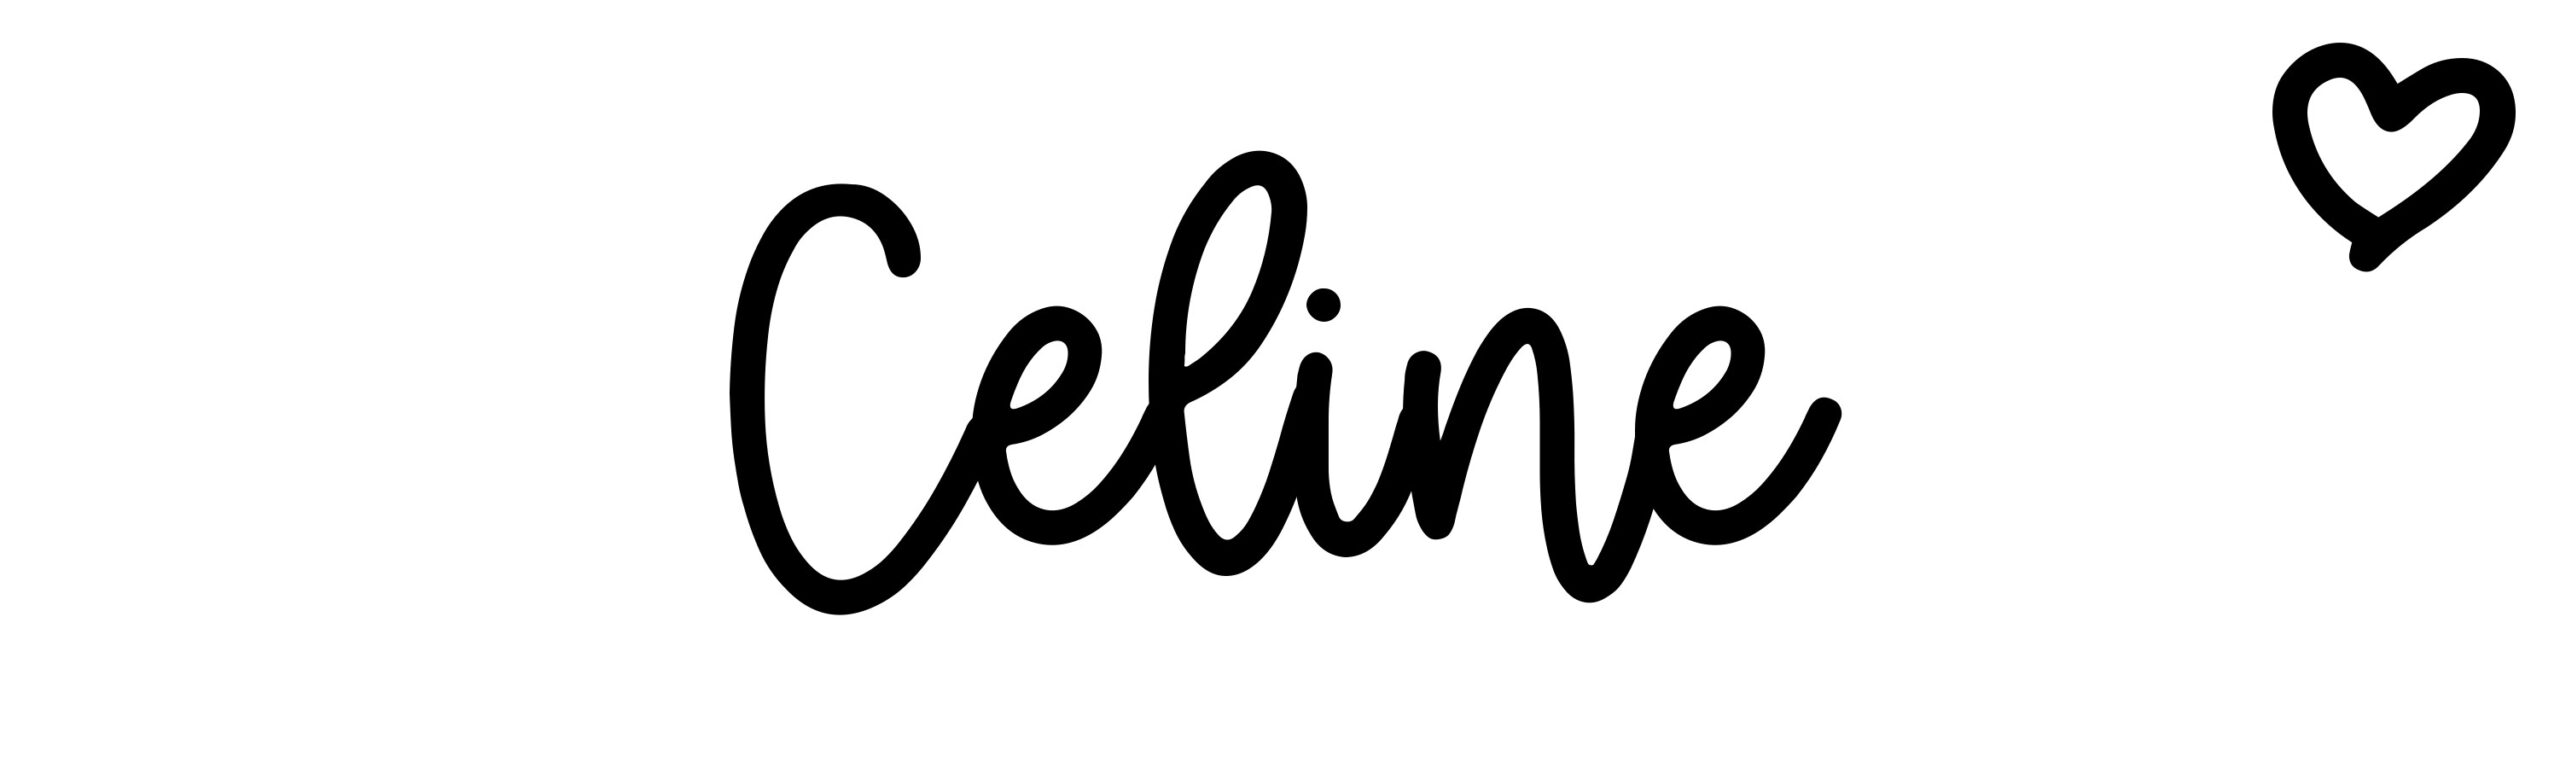 Celine - Name meaning, origin, variations and more